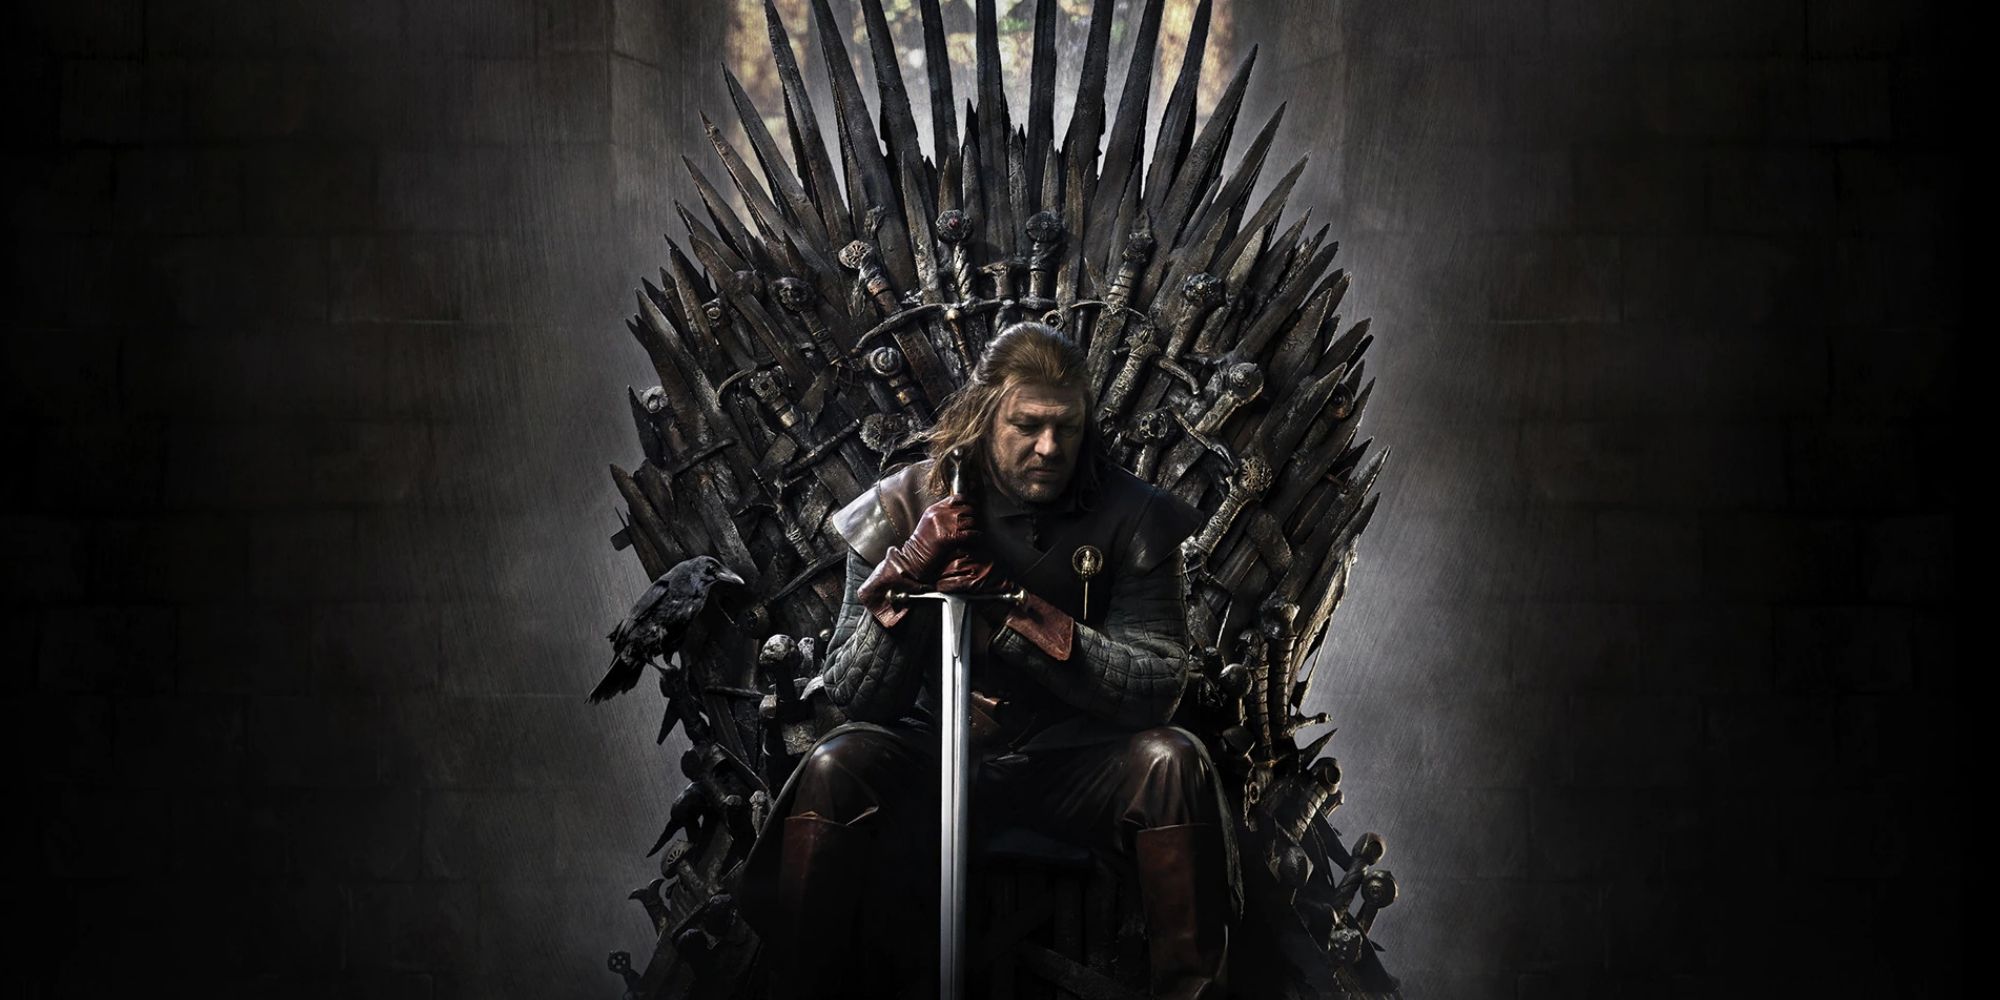 Ned Stark on the Iron Throne in 'Game of Thrones'